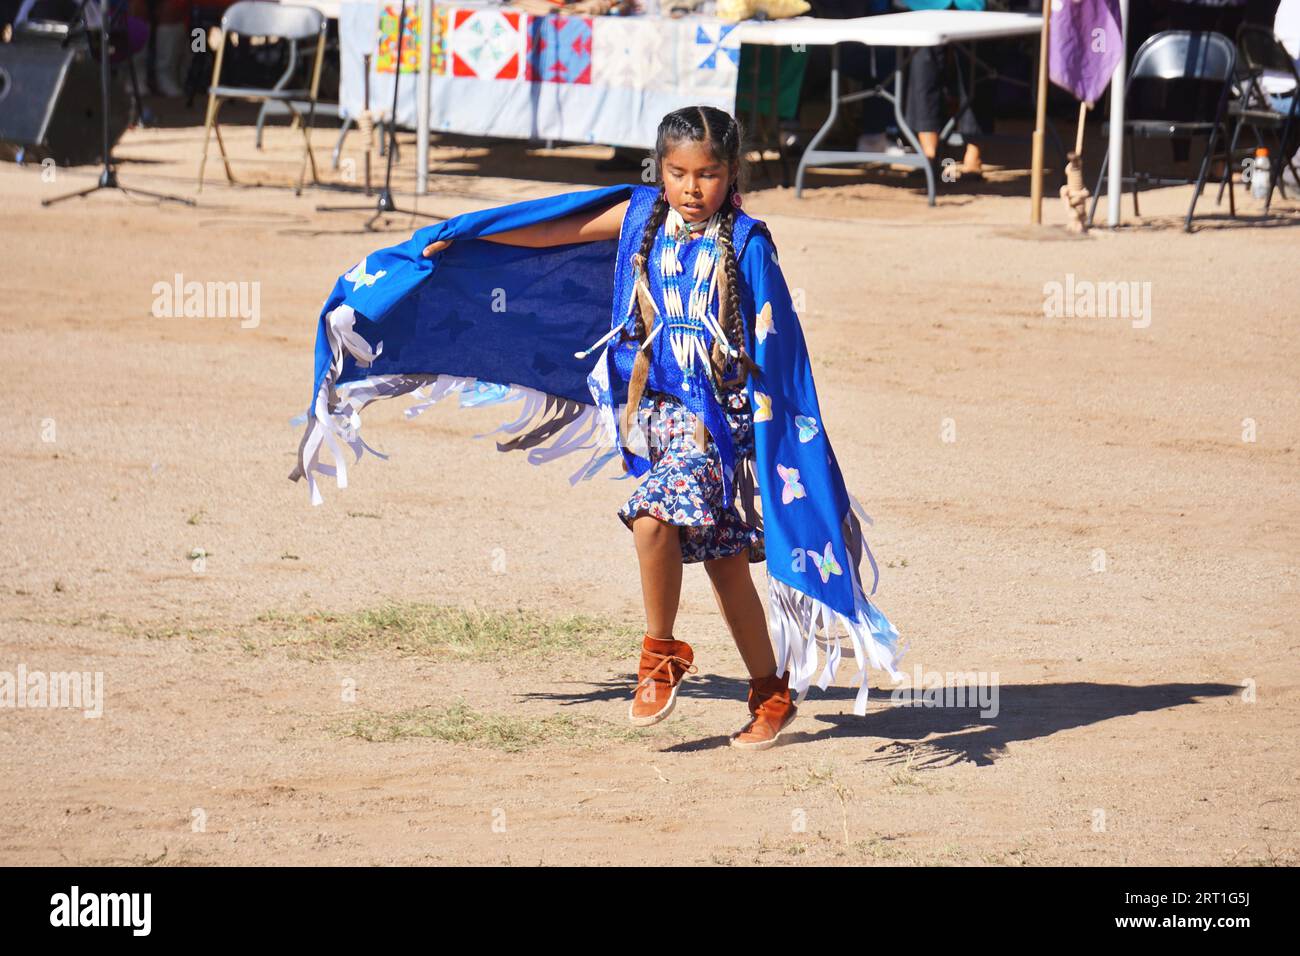 A young Native American dancer minds her steps as she competes in a shawl dance during a powwow on the San Xavier Reservation, near Tucson, Arizona. Stock Photo